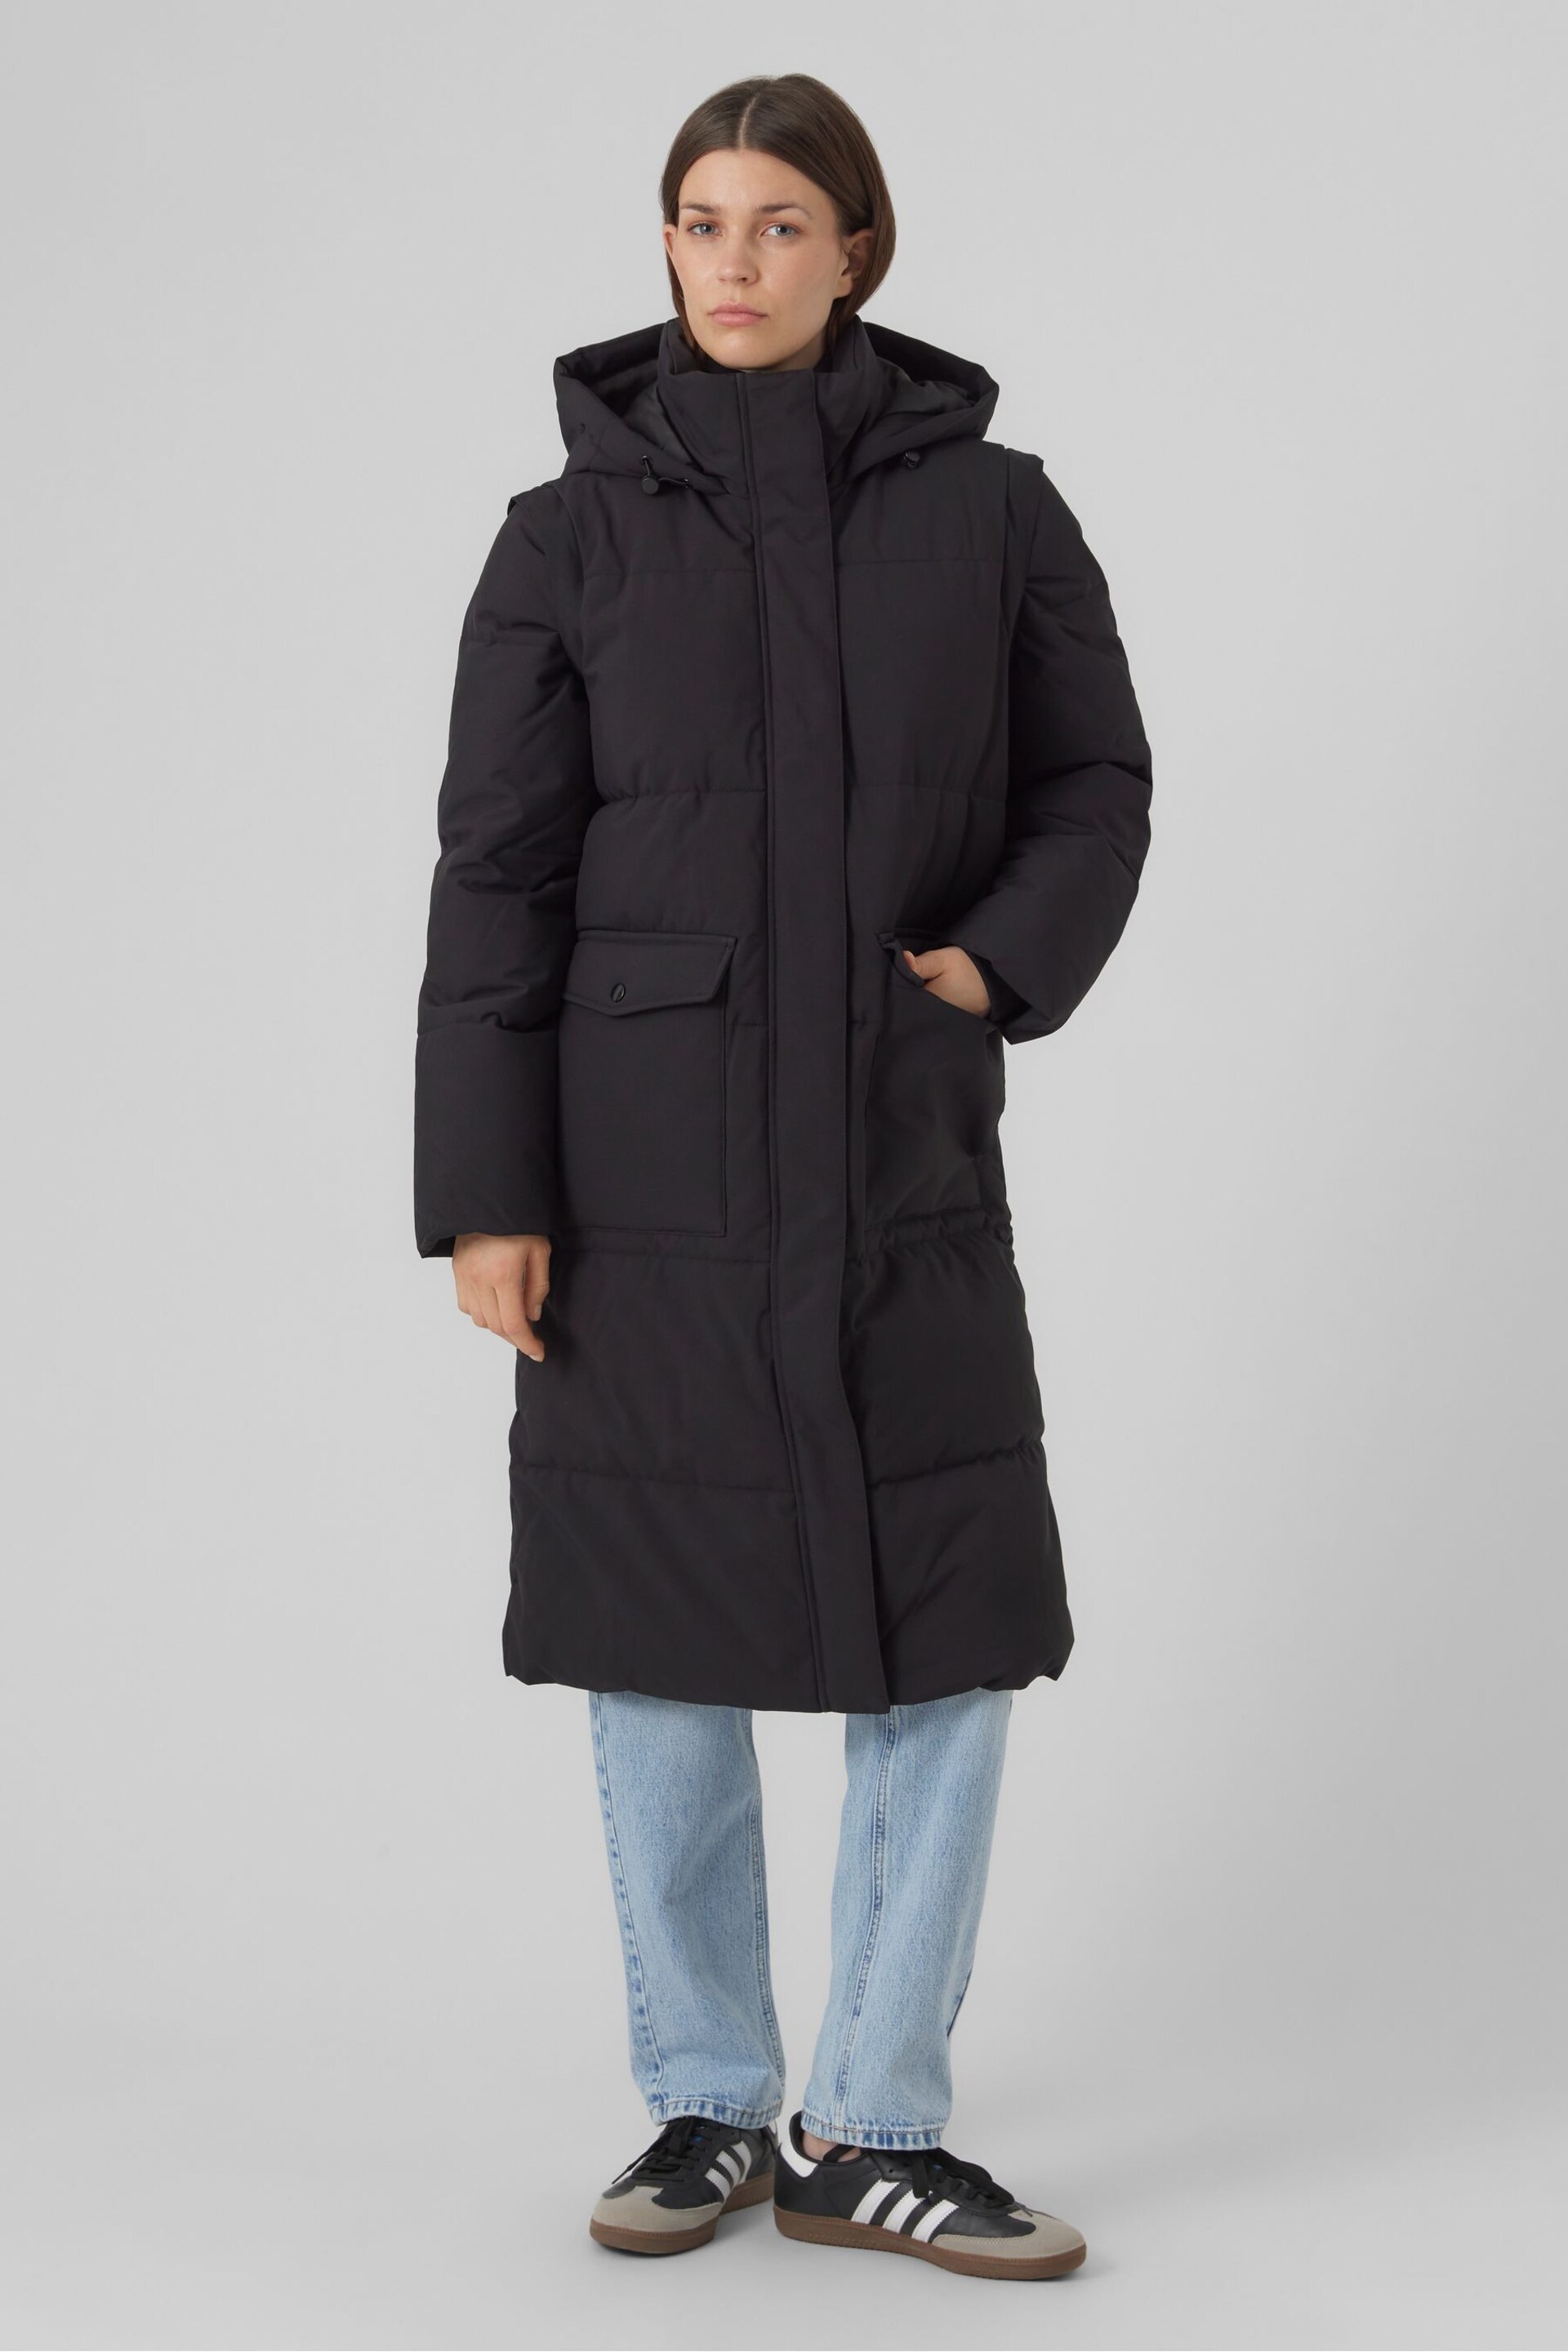 VERO MODA Black 2-In-1 Padded Coat And Gilet Set With Detachable Sleeves - Image 1 of 5